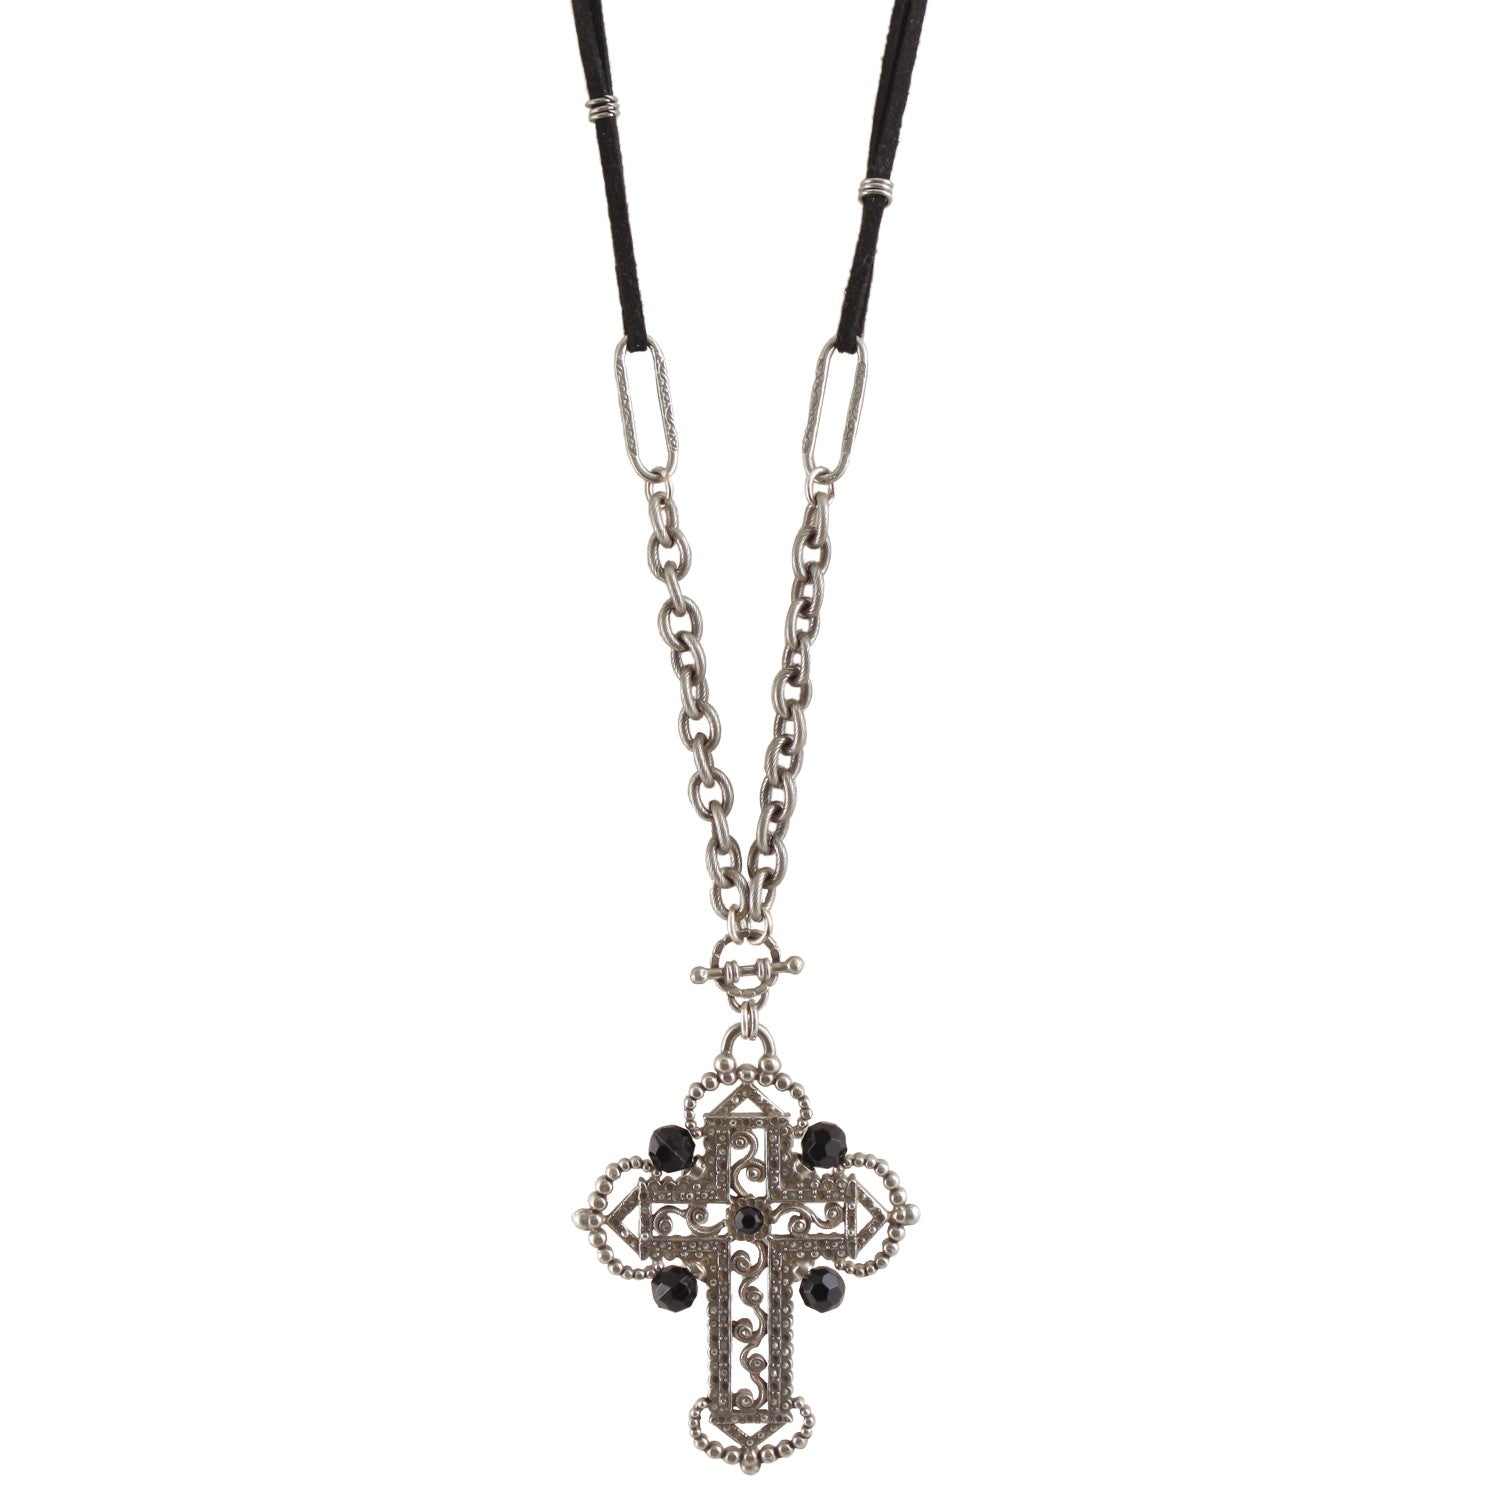 Best Vclm Long Black Bead Necklace With Cross Charms for sale in Raleigh,  North Carolina for 2024